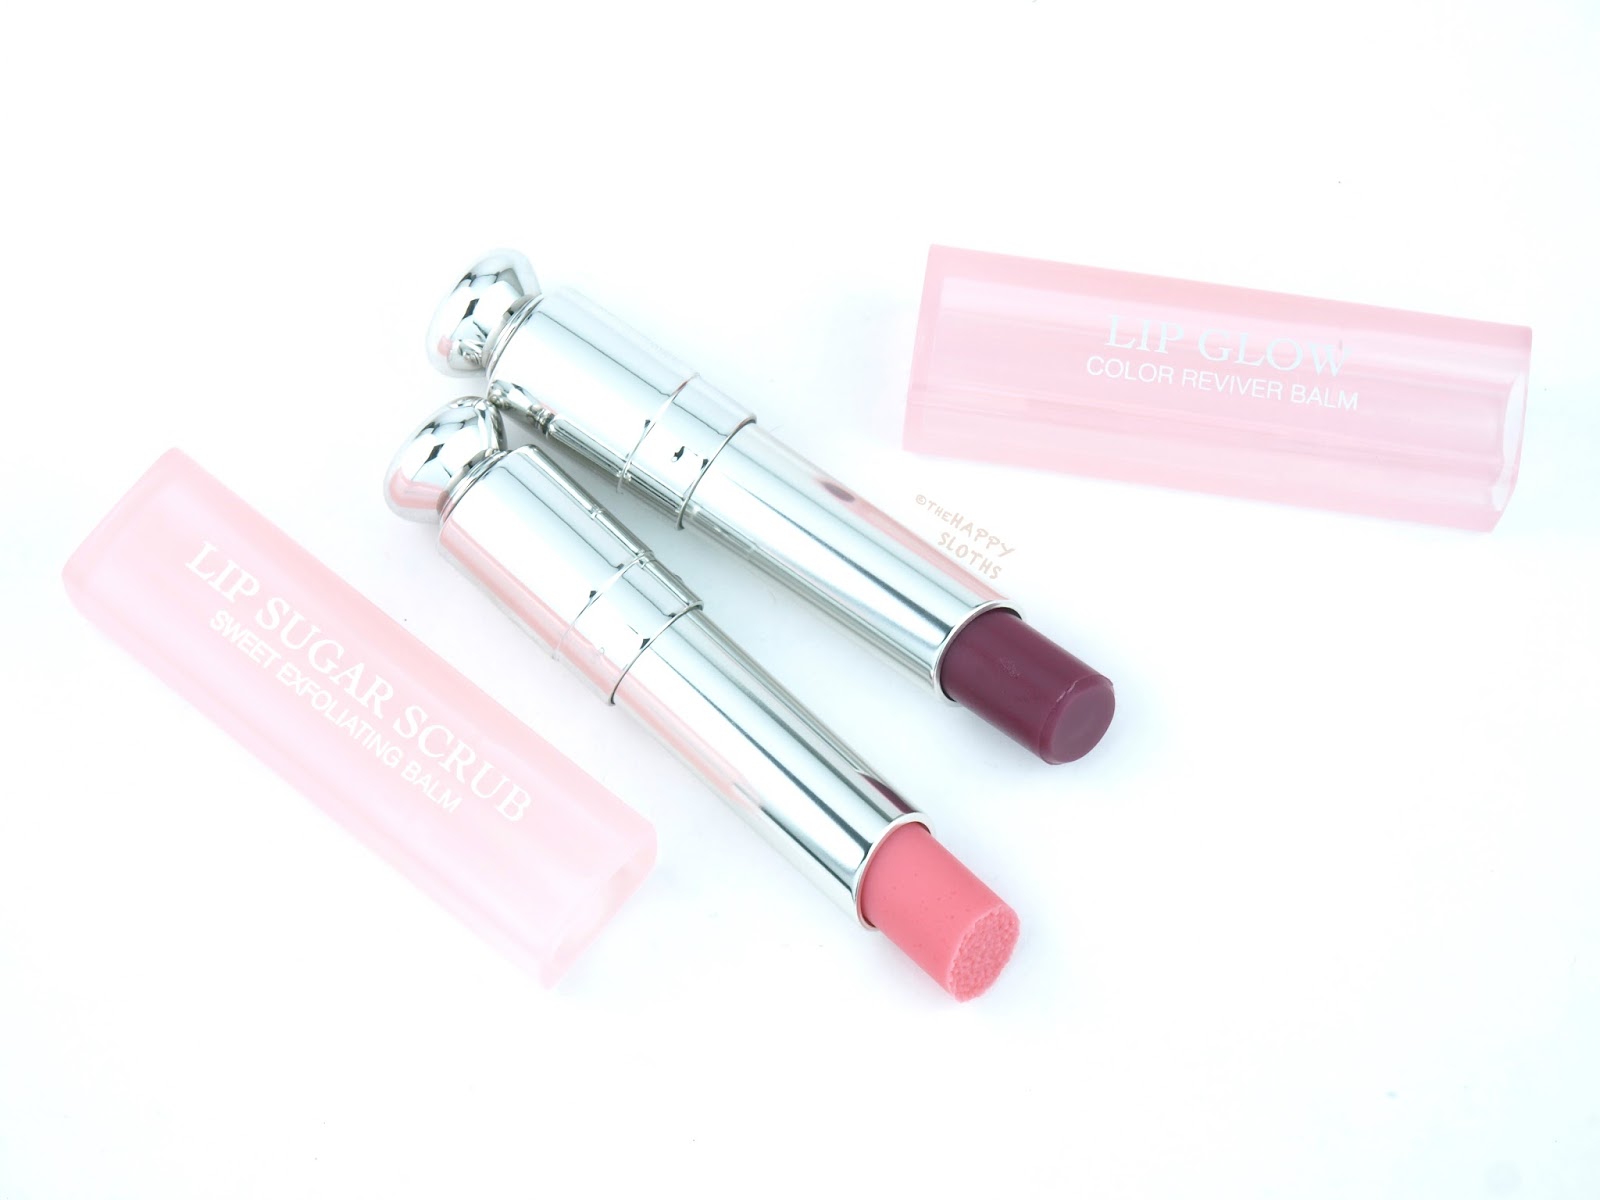 NEW Dior Addict Lip Glow in "006 Berry" & Lip Sugar Scrub: Review and Swatches